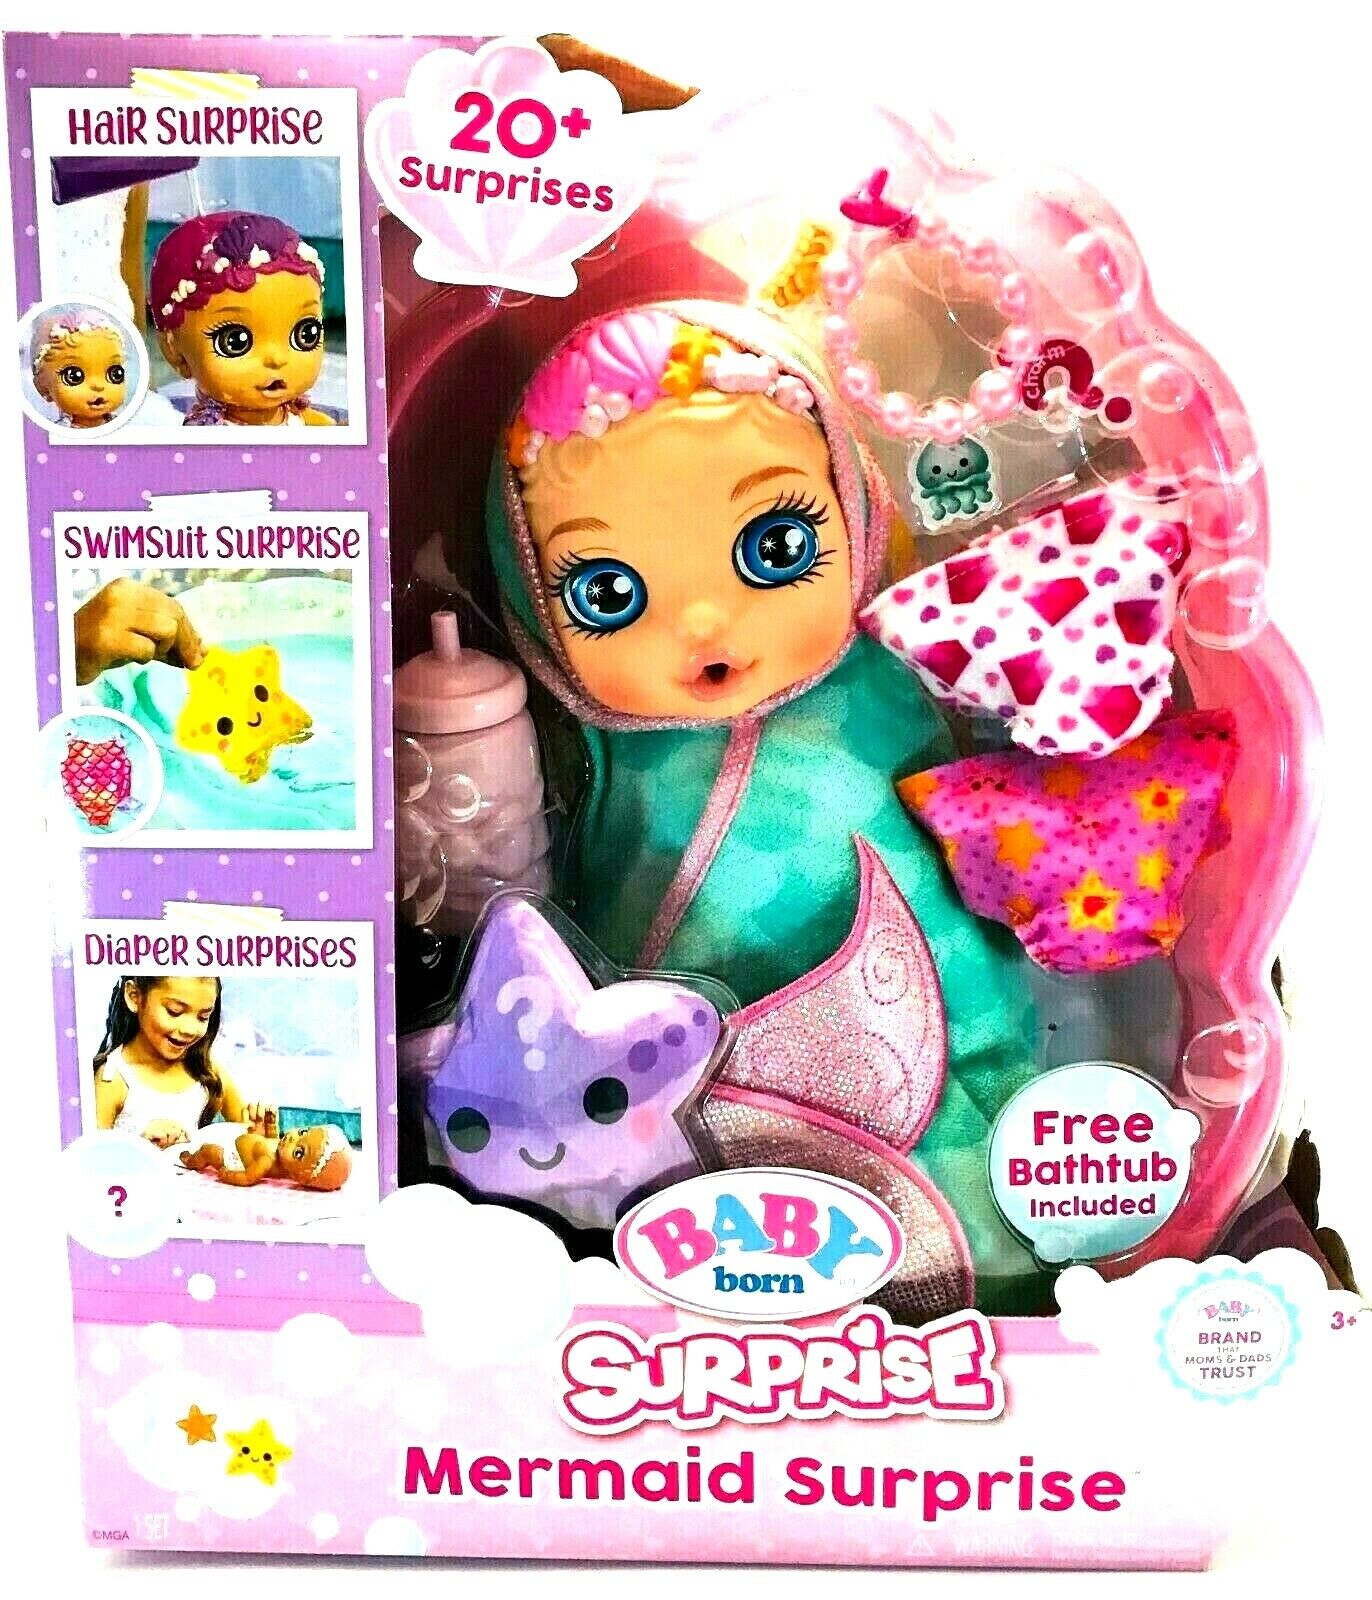 Baby Born Surprise Mermaid Surprise – Teal Towel with 20+ Surprises BRAND NEW Baby Born 917691